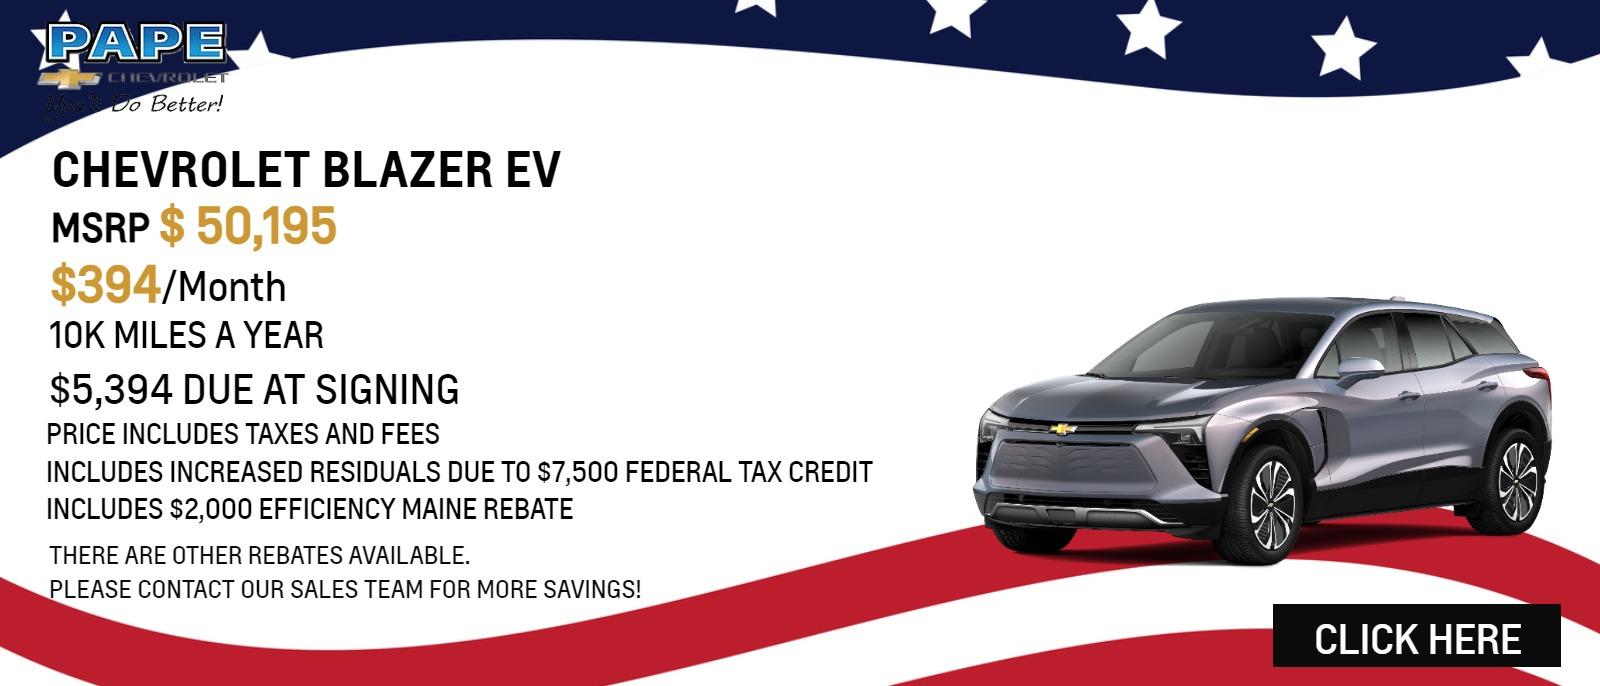 MSRP $ 50,195
- $394/Month
- 10k miles a year
- $5,394 due at signing
- Price Includes taxes and fees
- Includes increased residuals due to $7,500 Federal Tax Credit
- Includes $2,000 Efficiency Maine Rebate
"